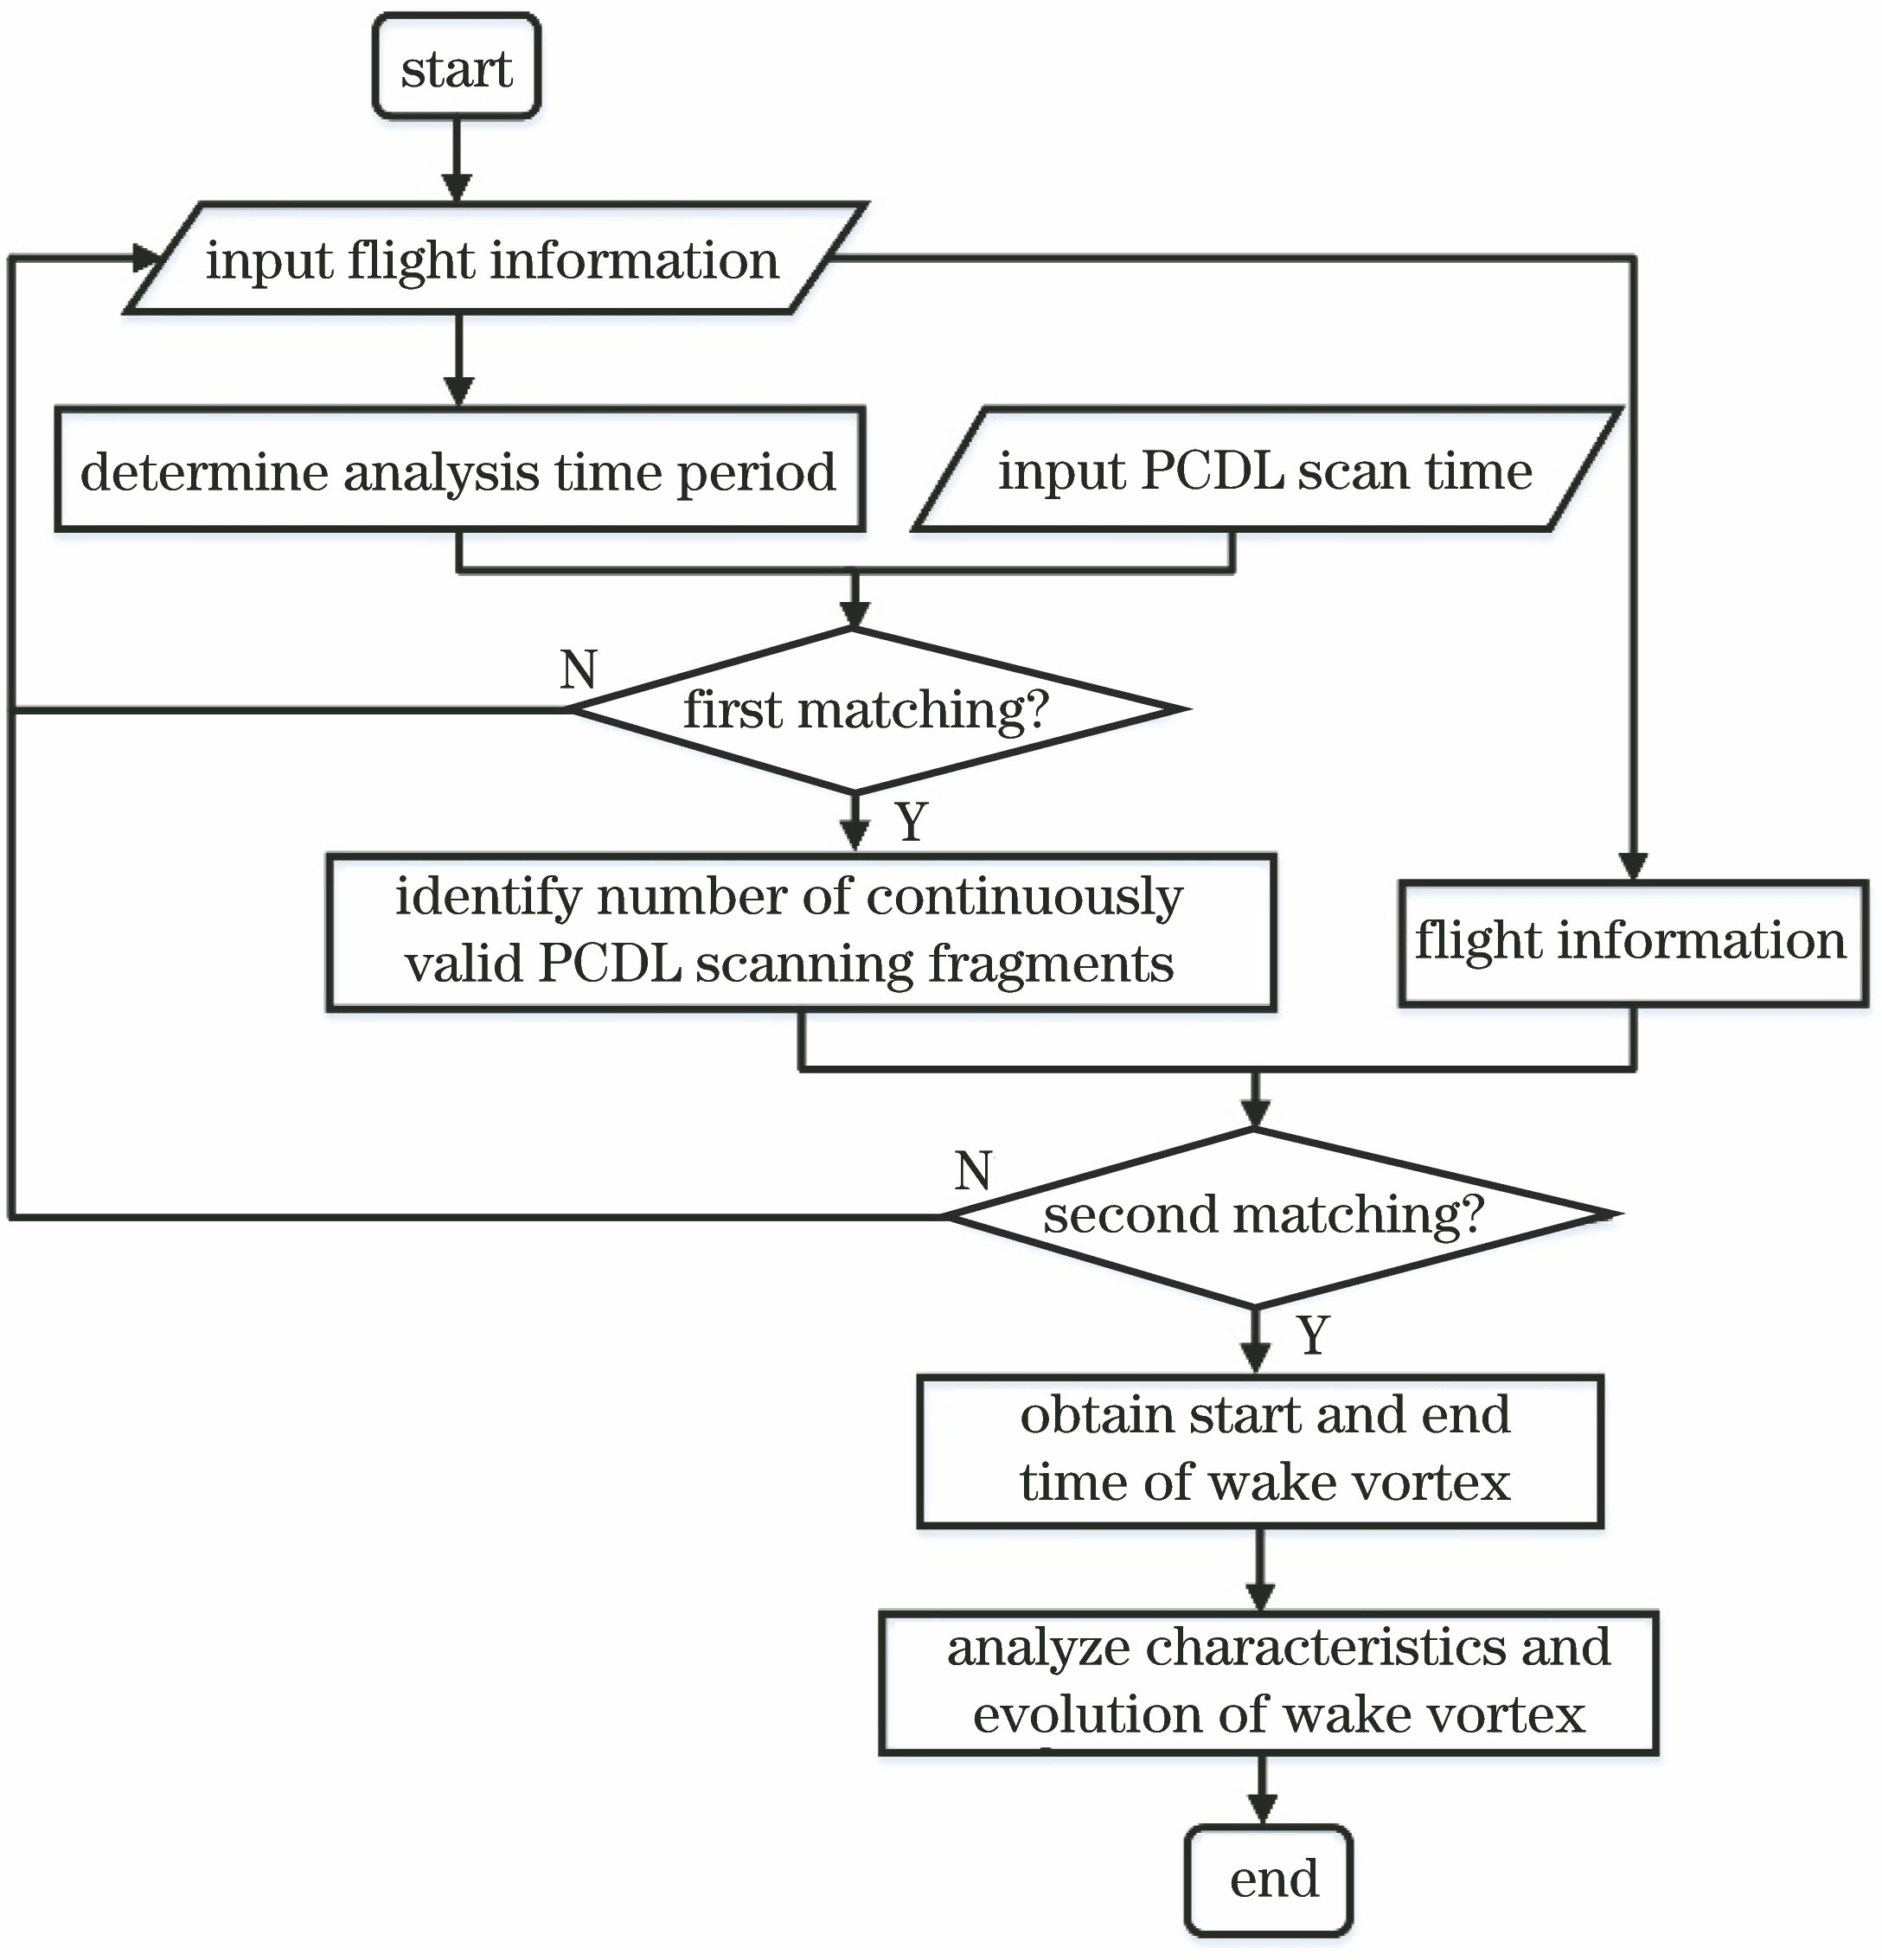 Flow chart of dynamic matching of PCDL scan fragments and flight information